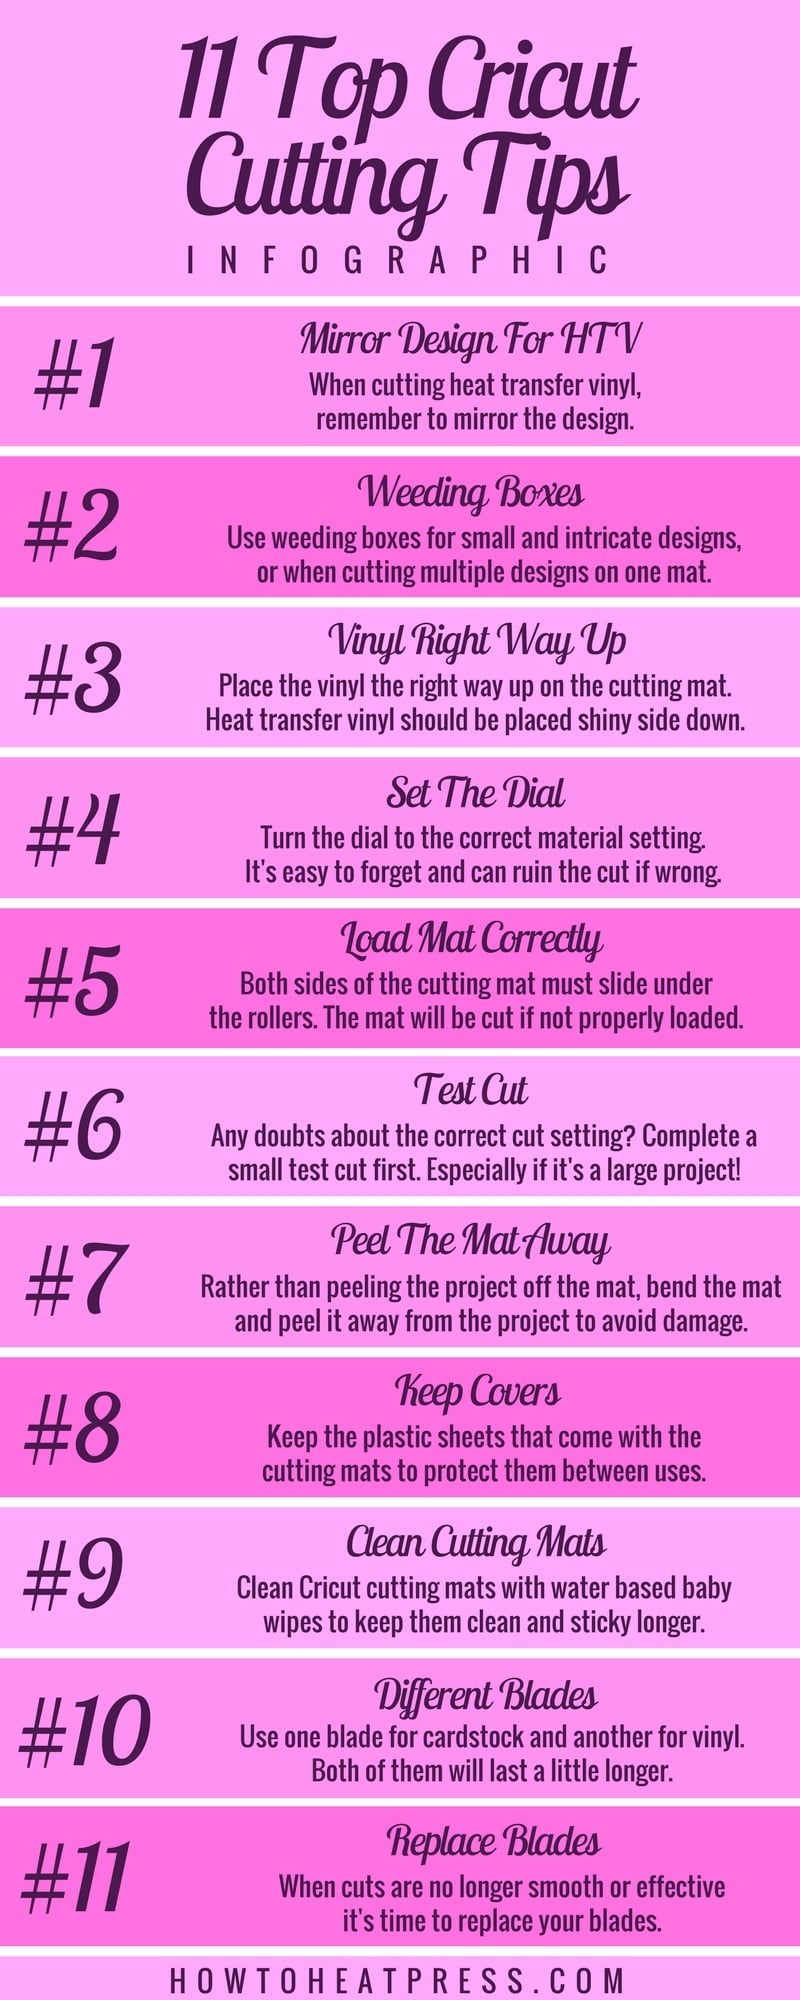 cricut tips and tricks infographic